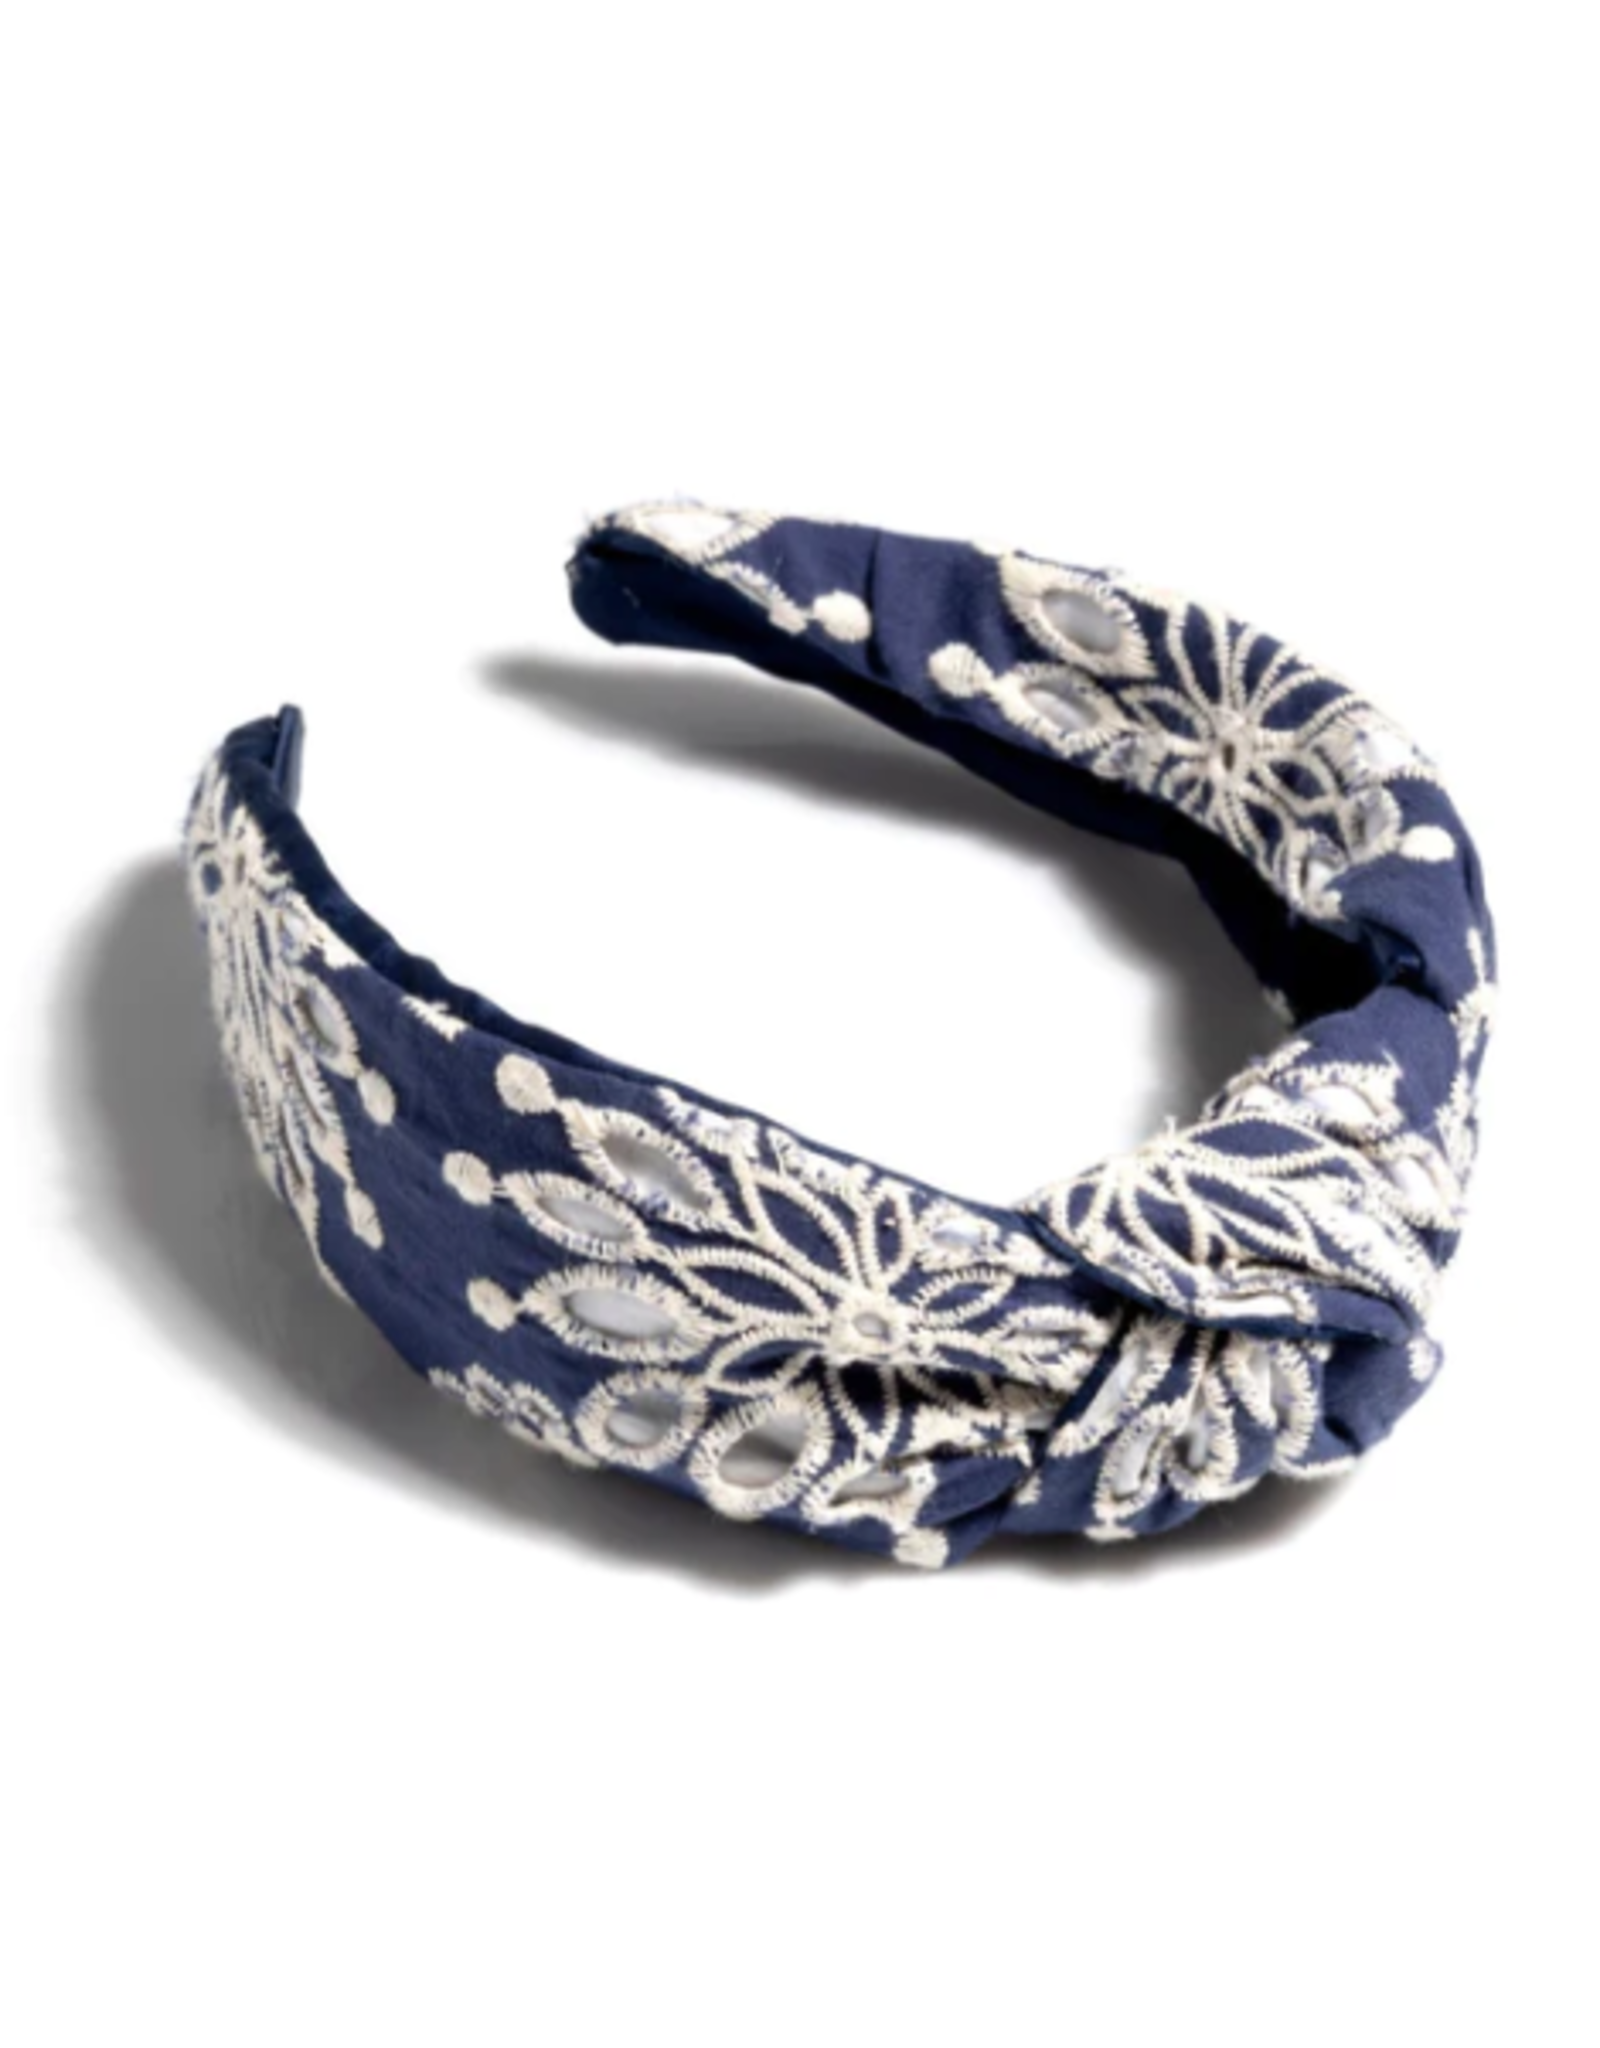 Accessories Shop by Place & Gather Chifley Knotted Headband in Navy